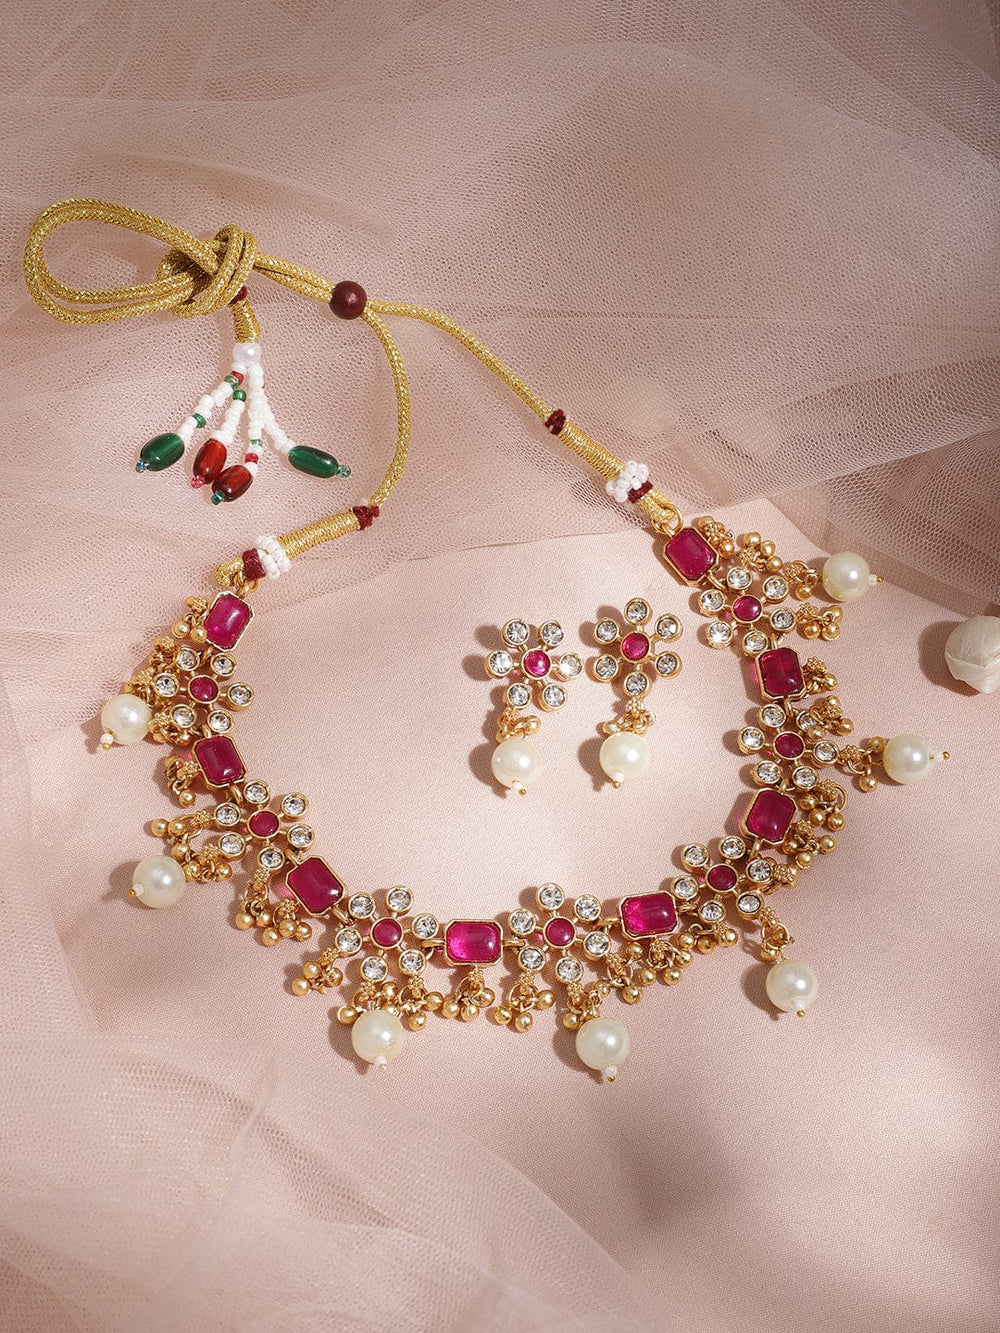 22KT Gold Plated Brass Metal Ruby Studded White Beaded Floral Necklace Set Jewellery Set